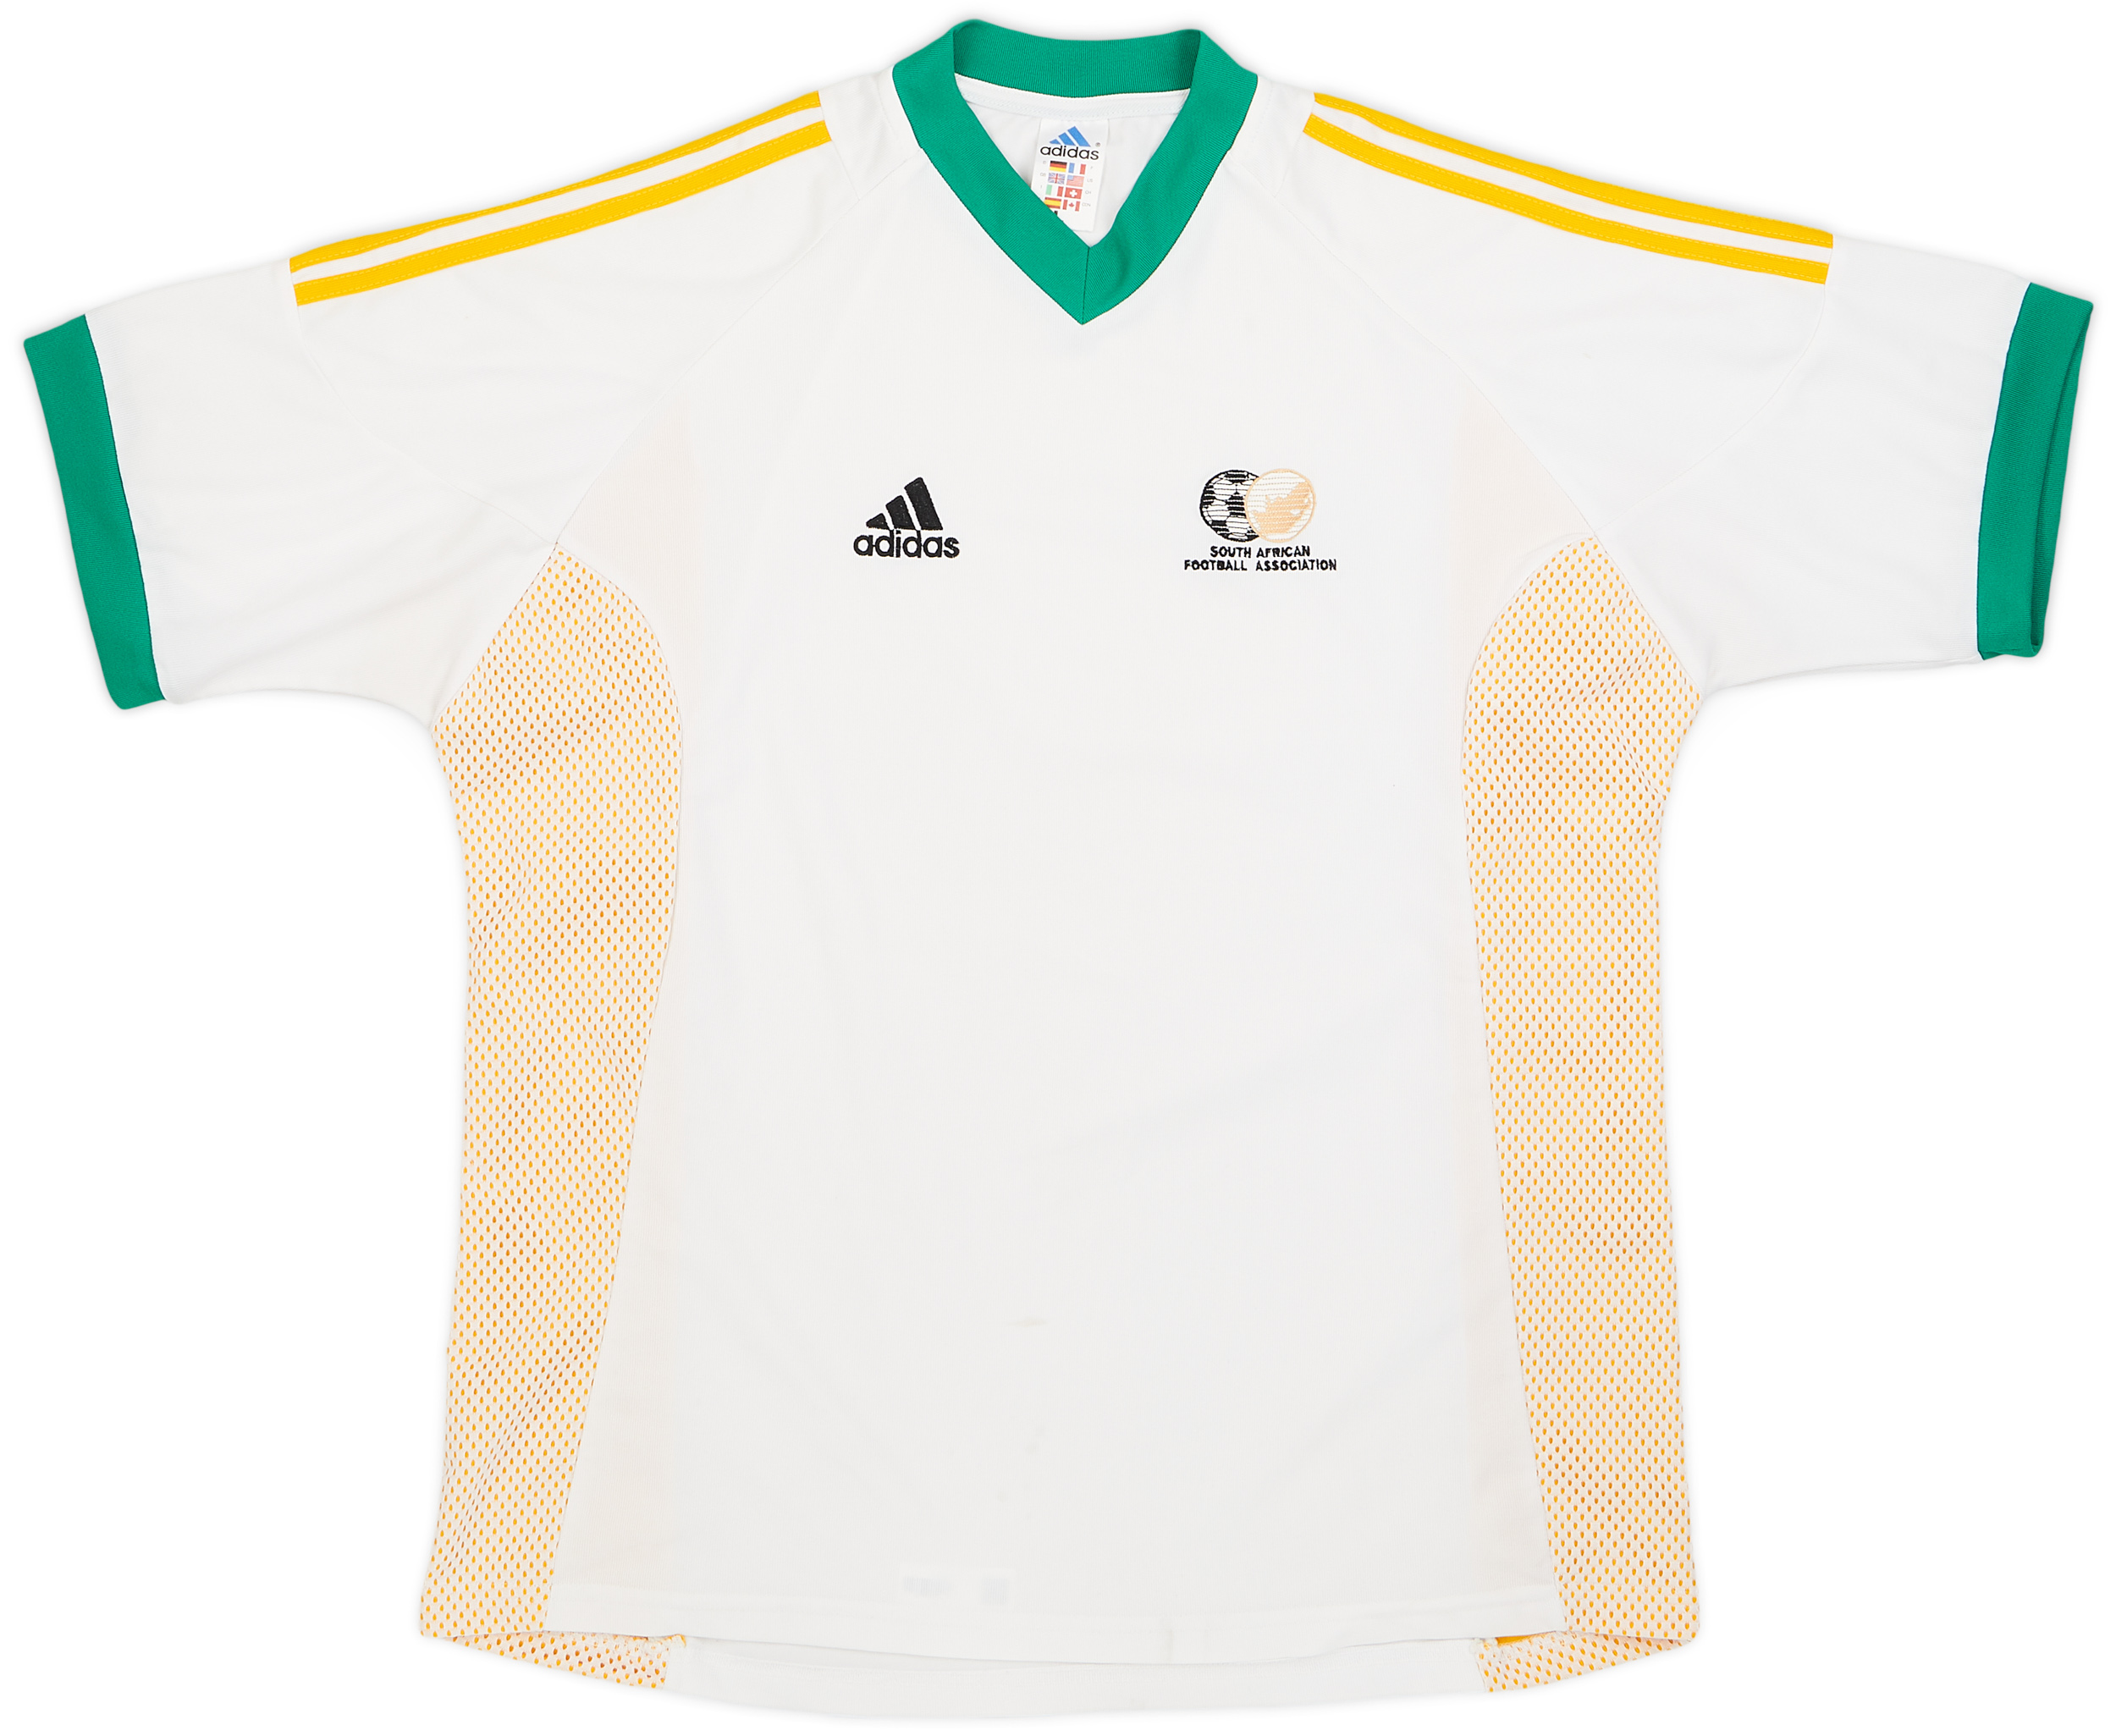 2002-04 South Africa Home Shirt - 9/10 - ()